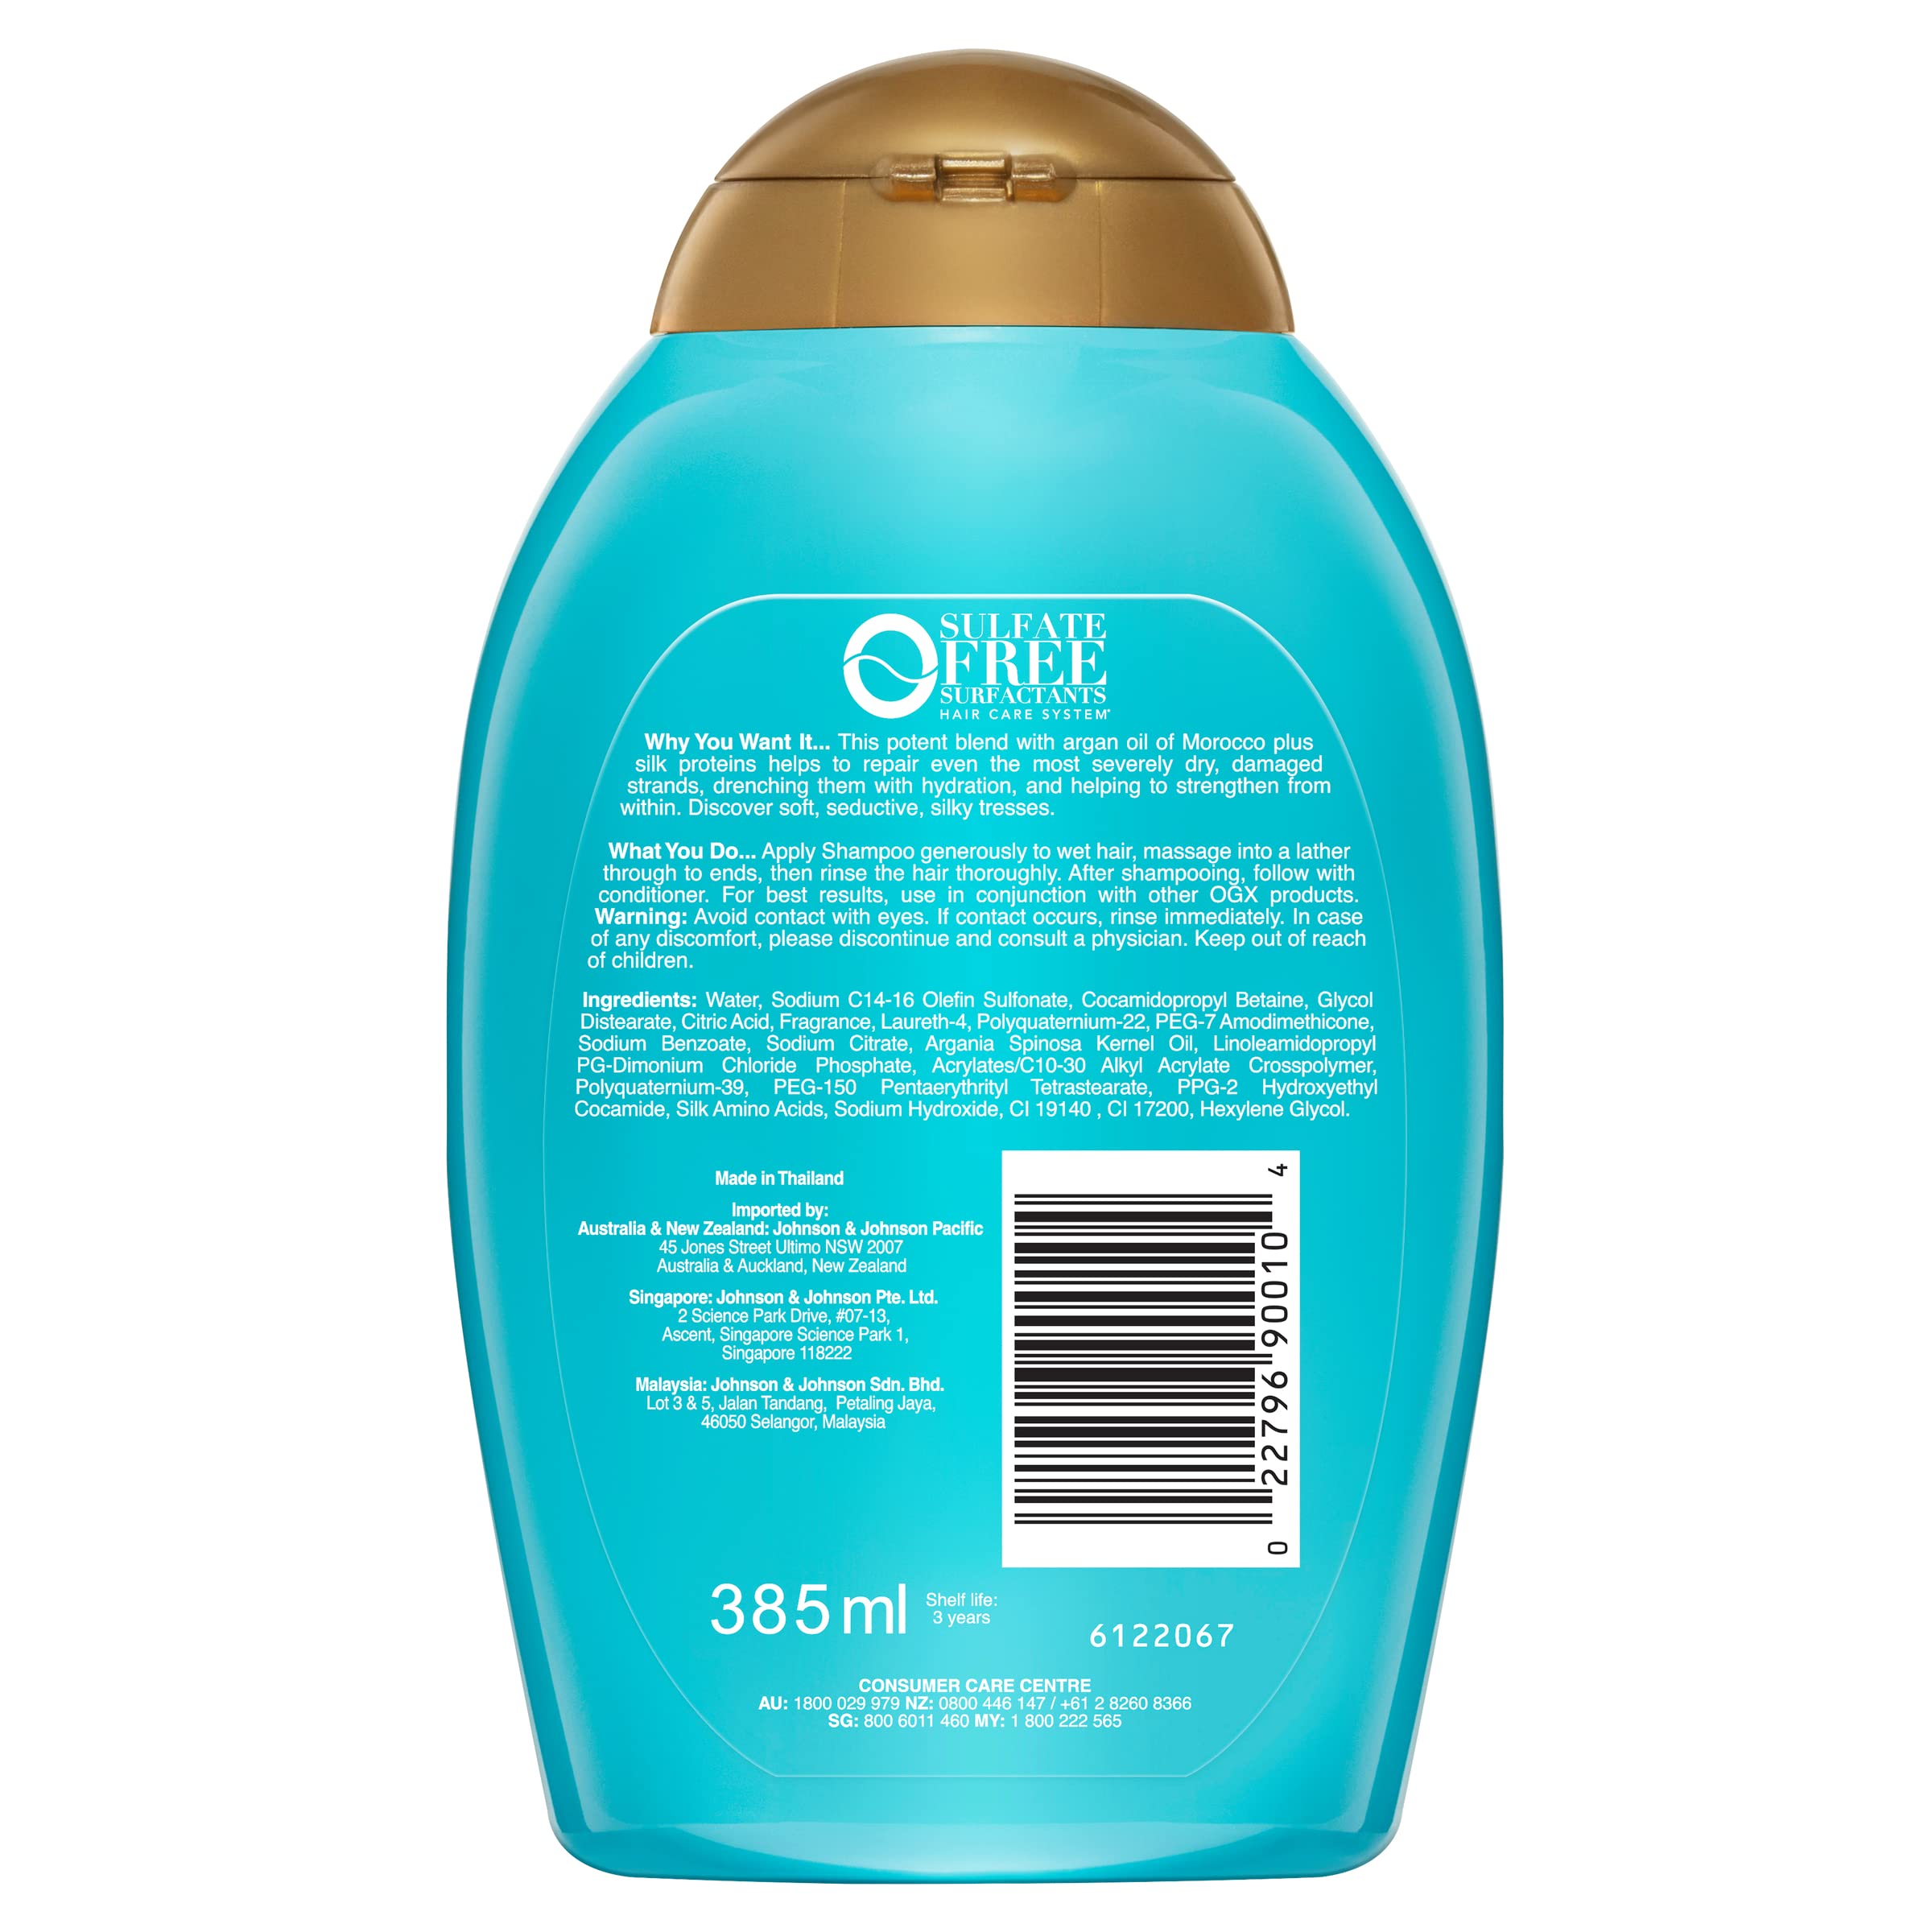 OGX Extra Strength Hydrate & Repair + Argan Oil of Morocco Shampoo for Dry, Damaged Hair, Cold-Pressed Argan Oil to Moisturize & Smooth, Paraben-Free, Sulfate-Free Surfactants, 13 fl oz